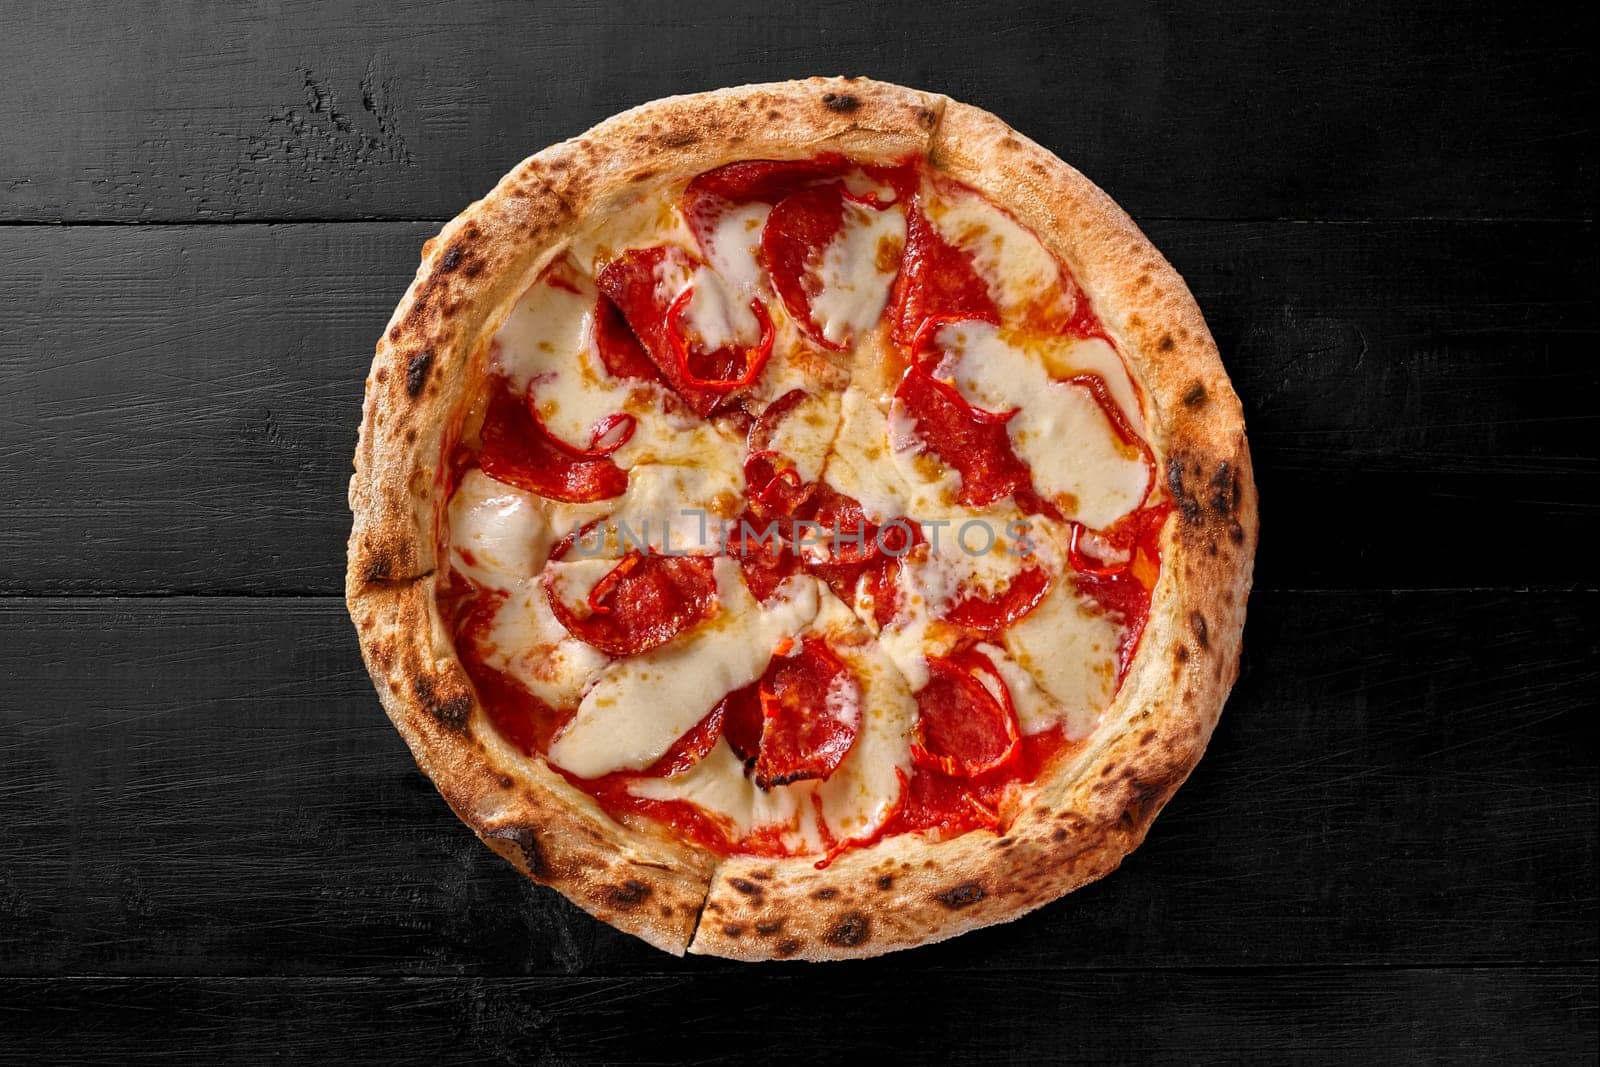 Delicious pepperoni pizza with browned dough edge, mozzarella cheese, thinly sliced salami sausage and spicy red chili pepper on black background. Italian-American cuisine